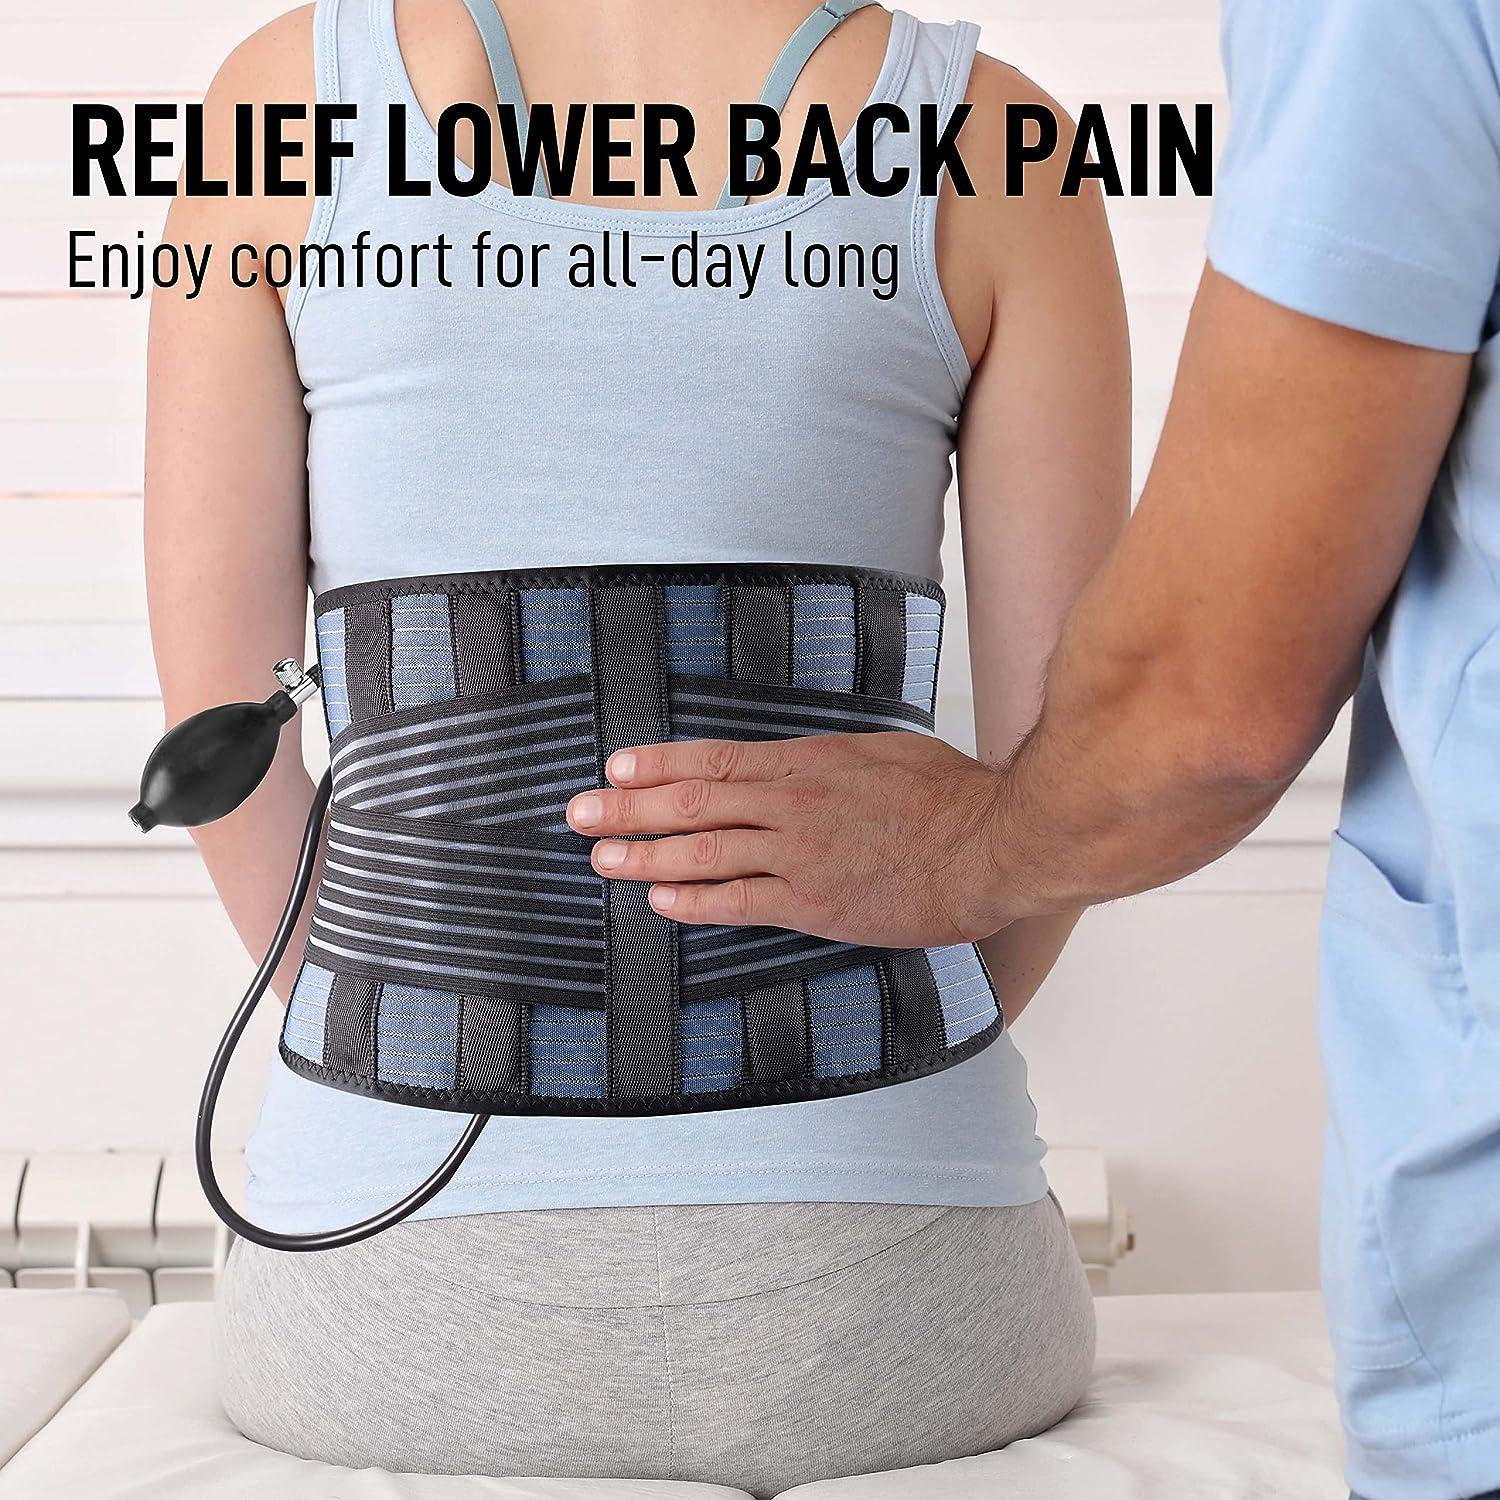 FEATOL Back Brace with Inflatable Pad for Men Women Lower Back